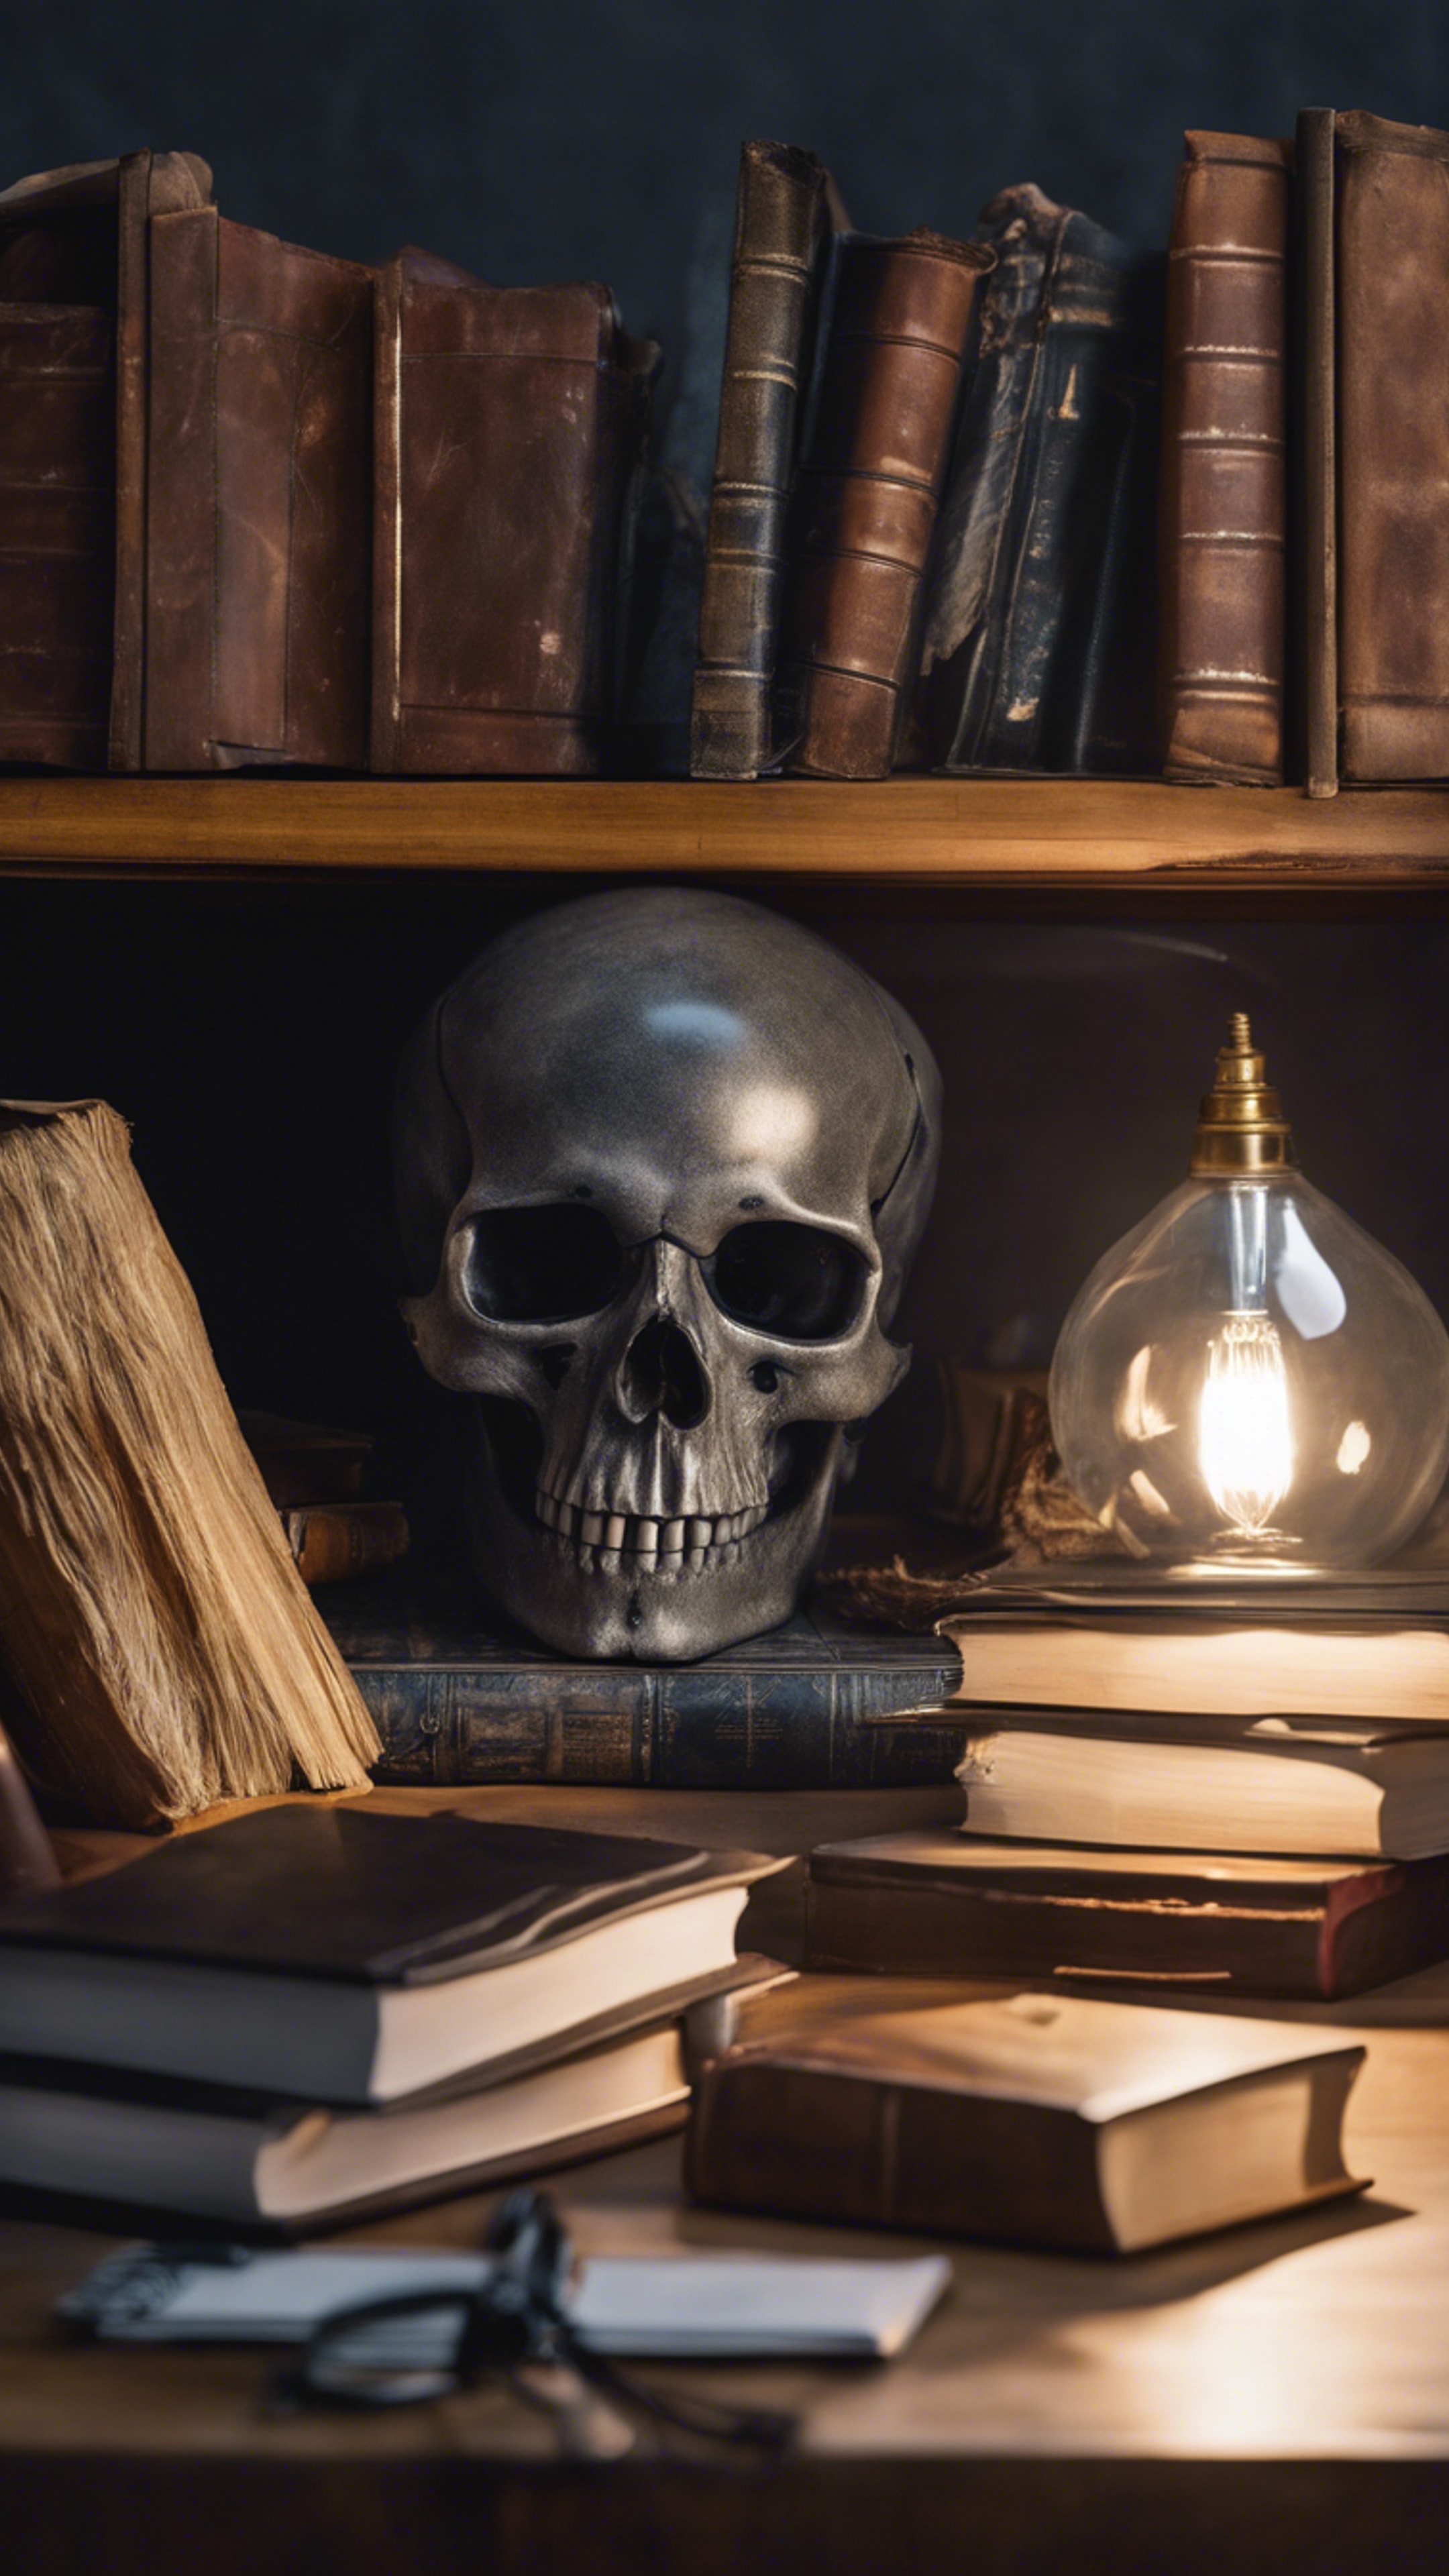 A study desk with a gray skull paperweight, surrounded by scattered books and a dimly lit lamp. Tapeta[9ada7a5adc764debb4f2]